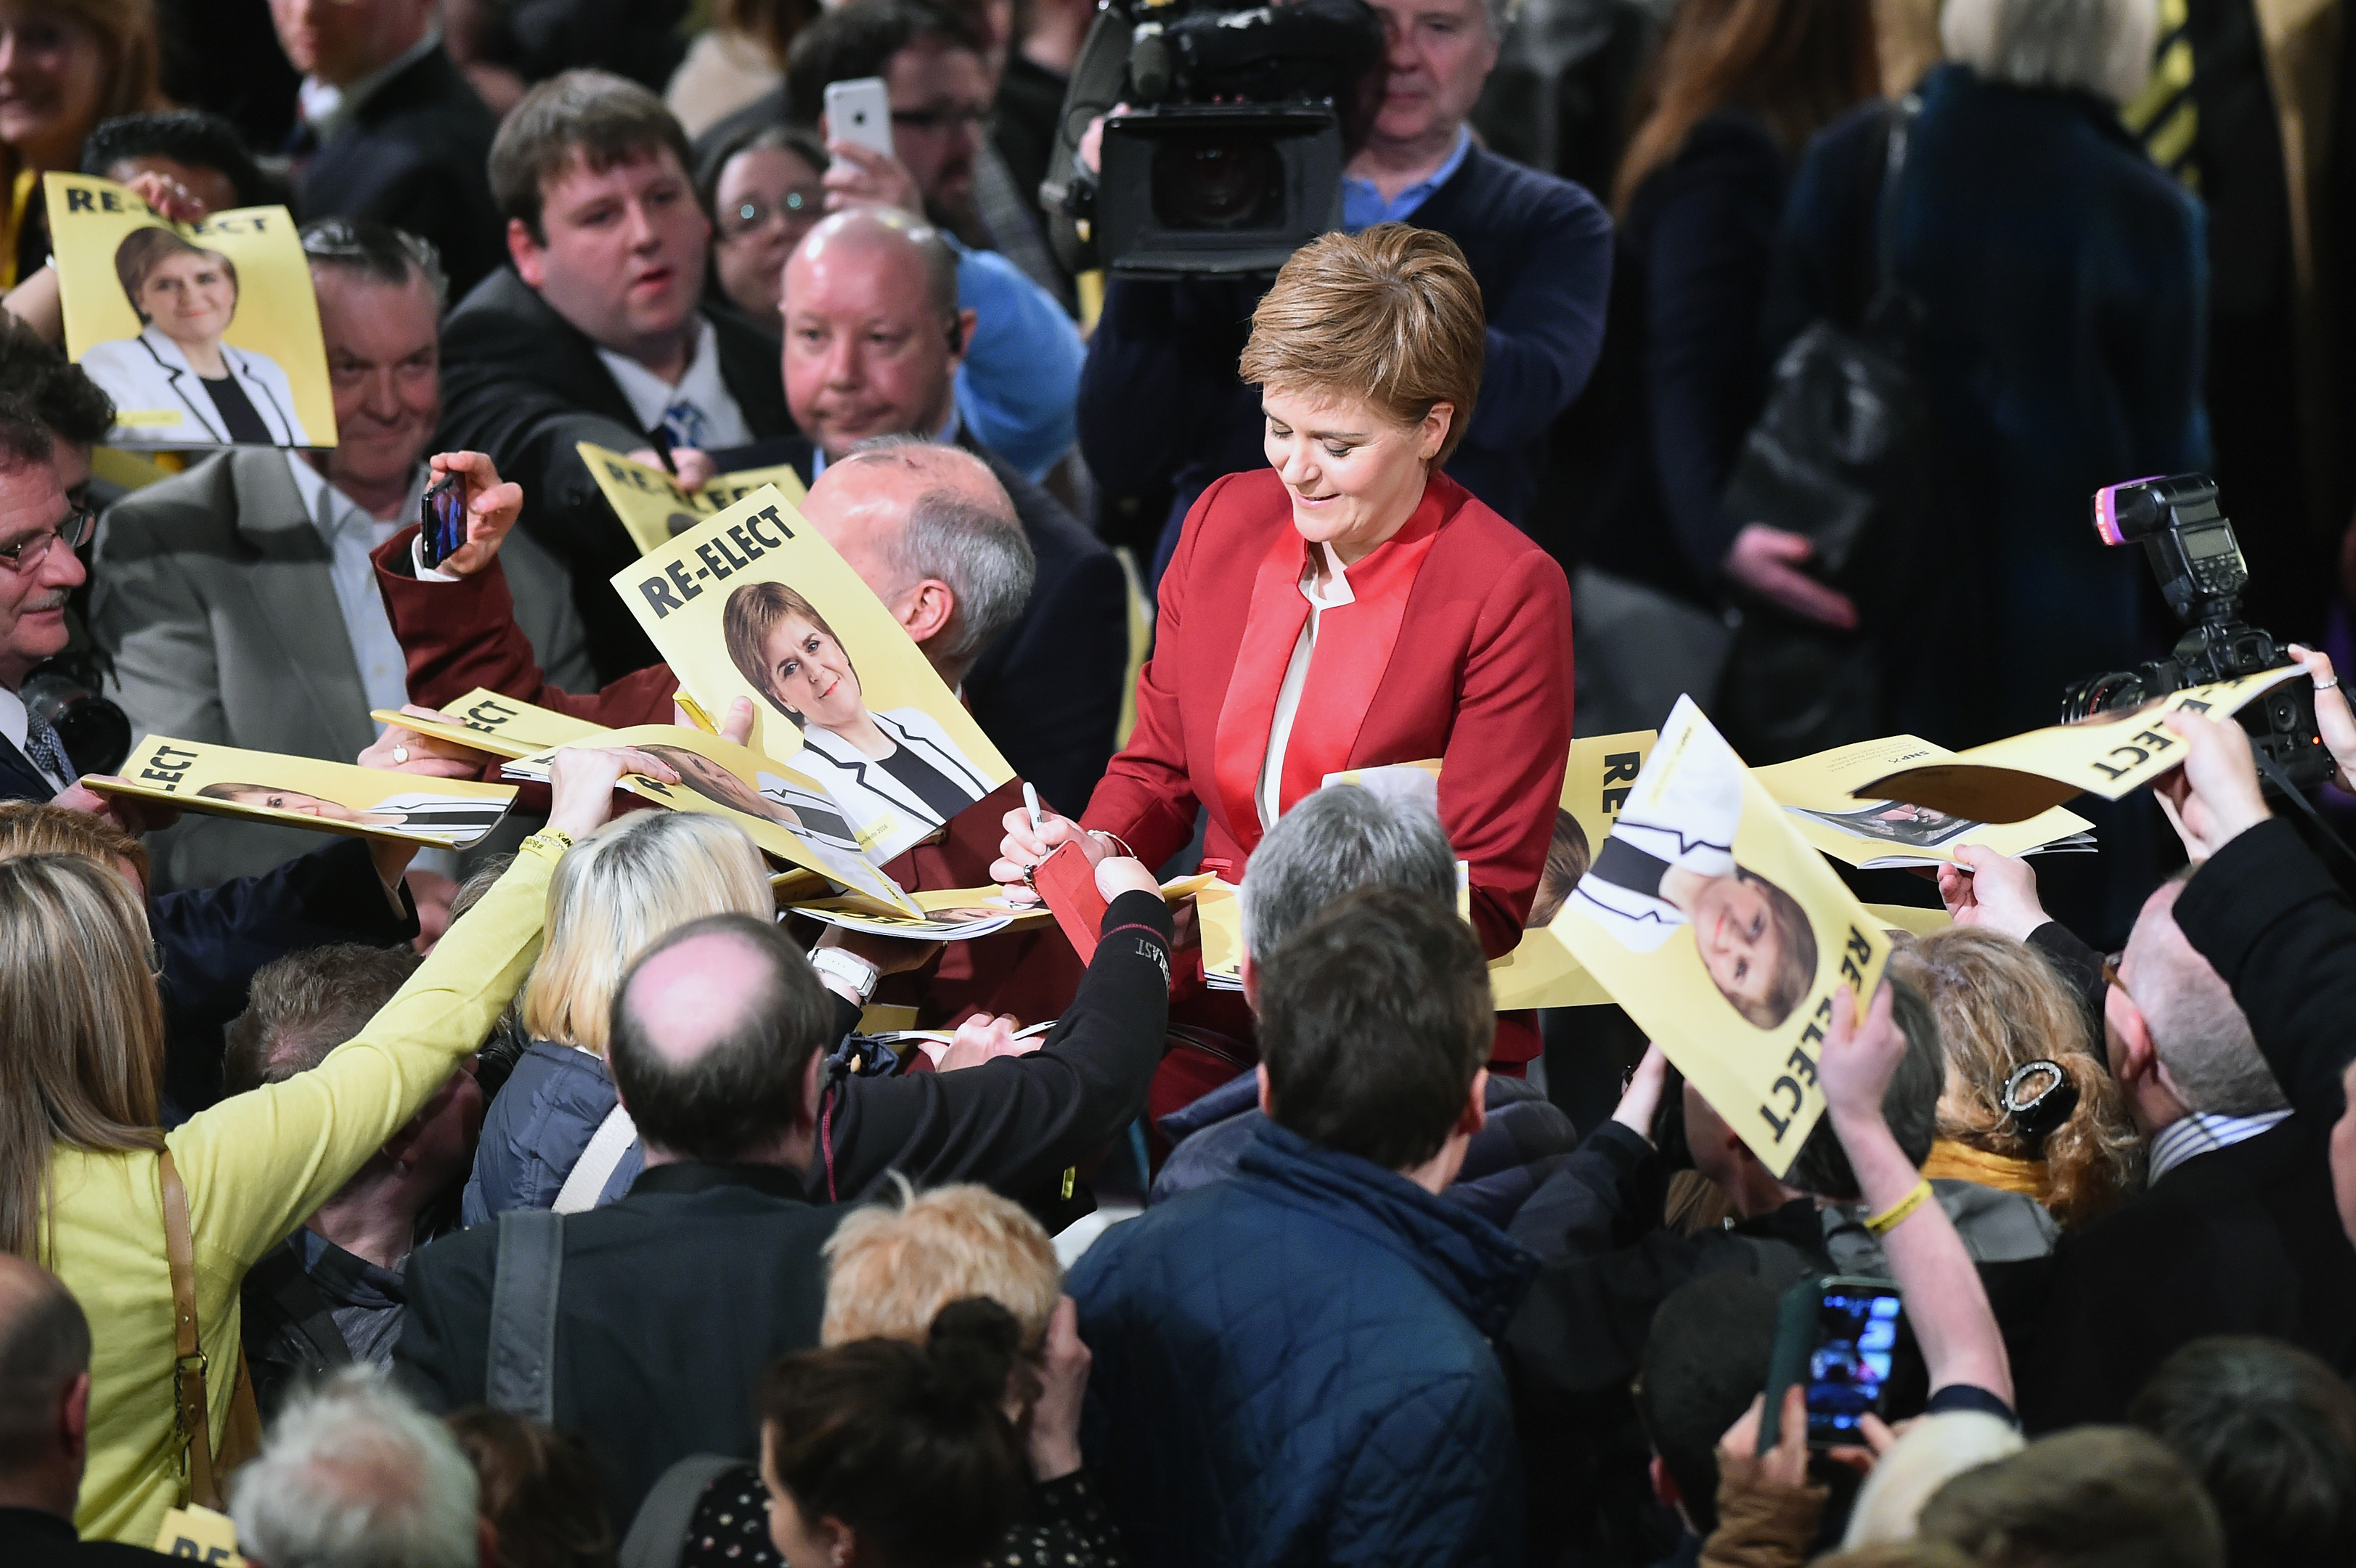 Nicola Sturgeon signs manifesto copies and posters during the launch.